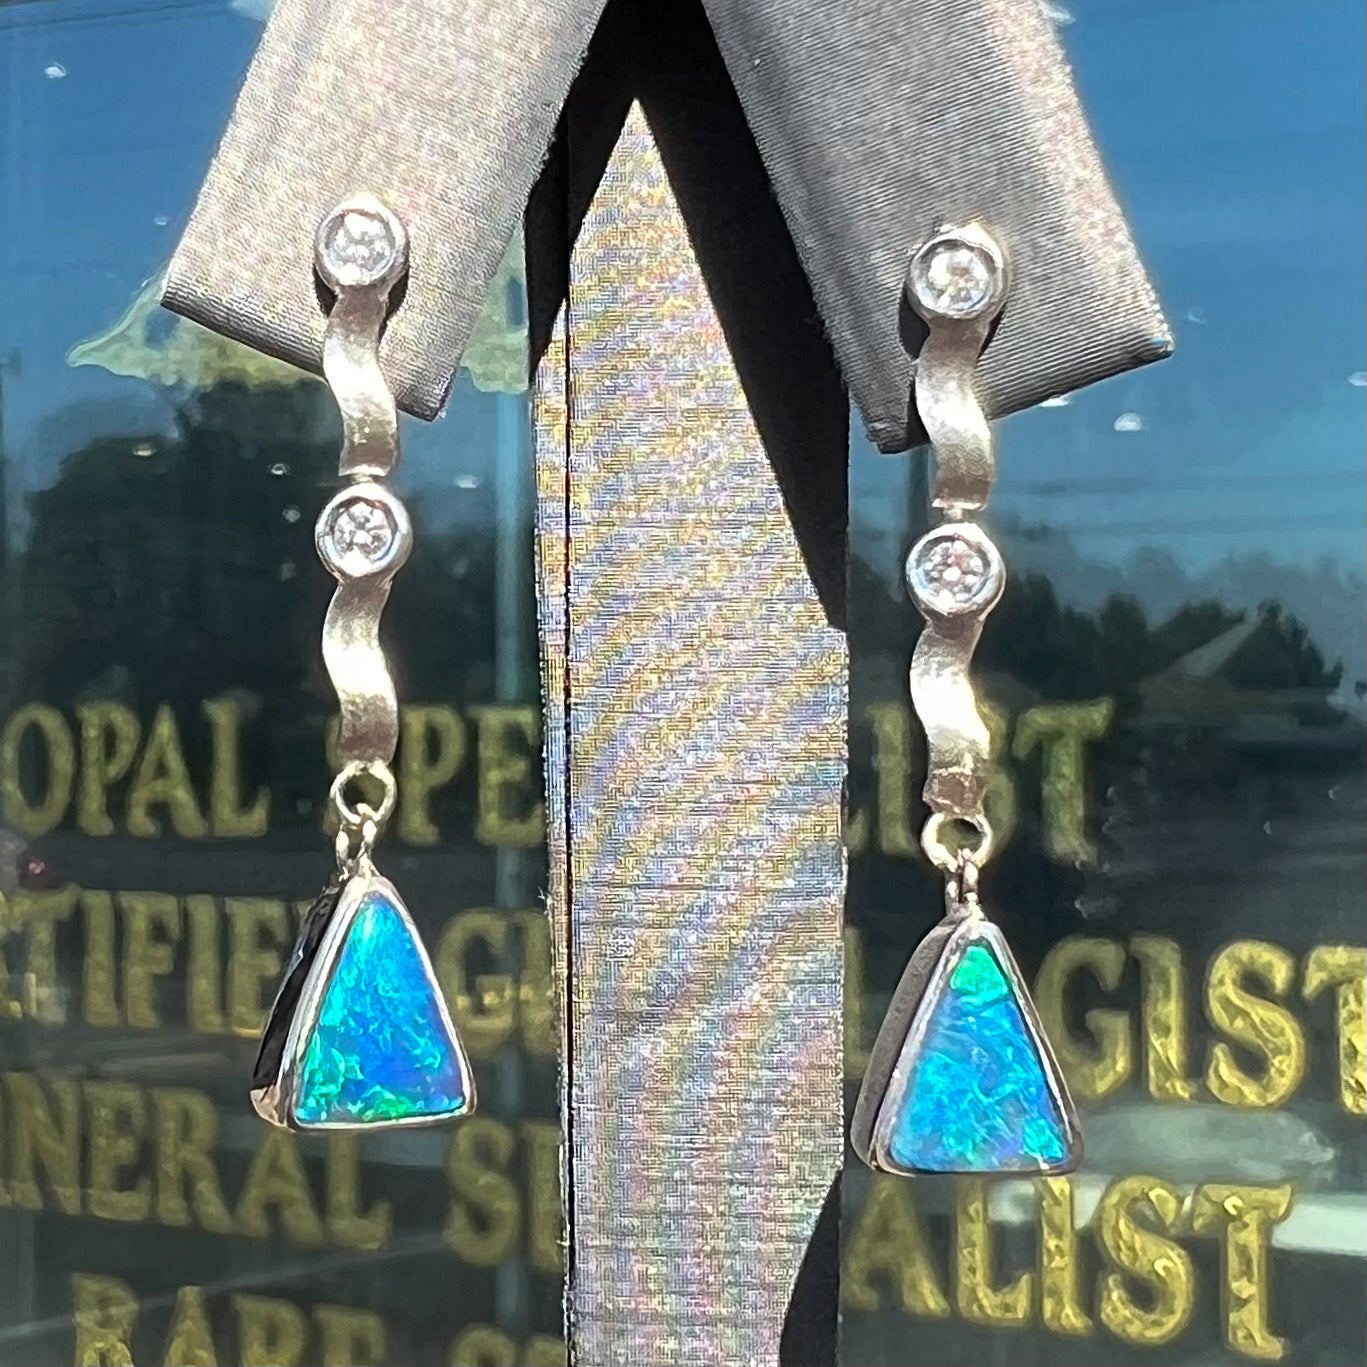 A pair of white gold earrings set with triangle cut natural black opals and round diamond accents.